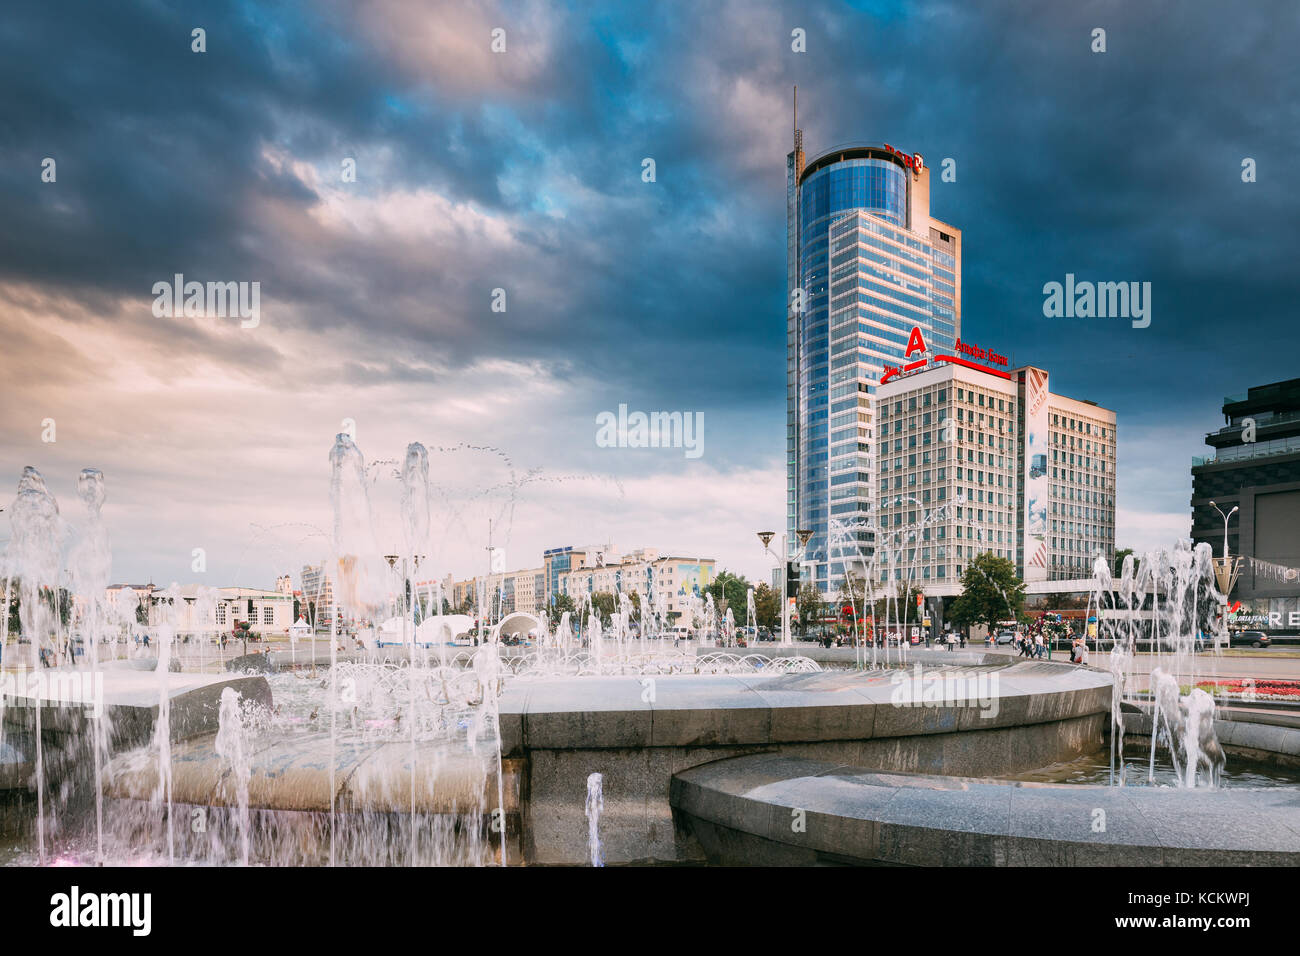 Minsk, Belarus - June 28, 2017: City Fountains On Background Of Business Center Royal Plaza. Stock Photo